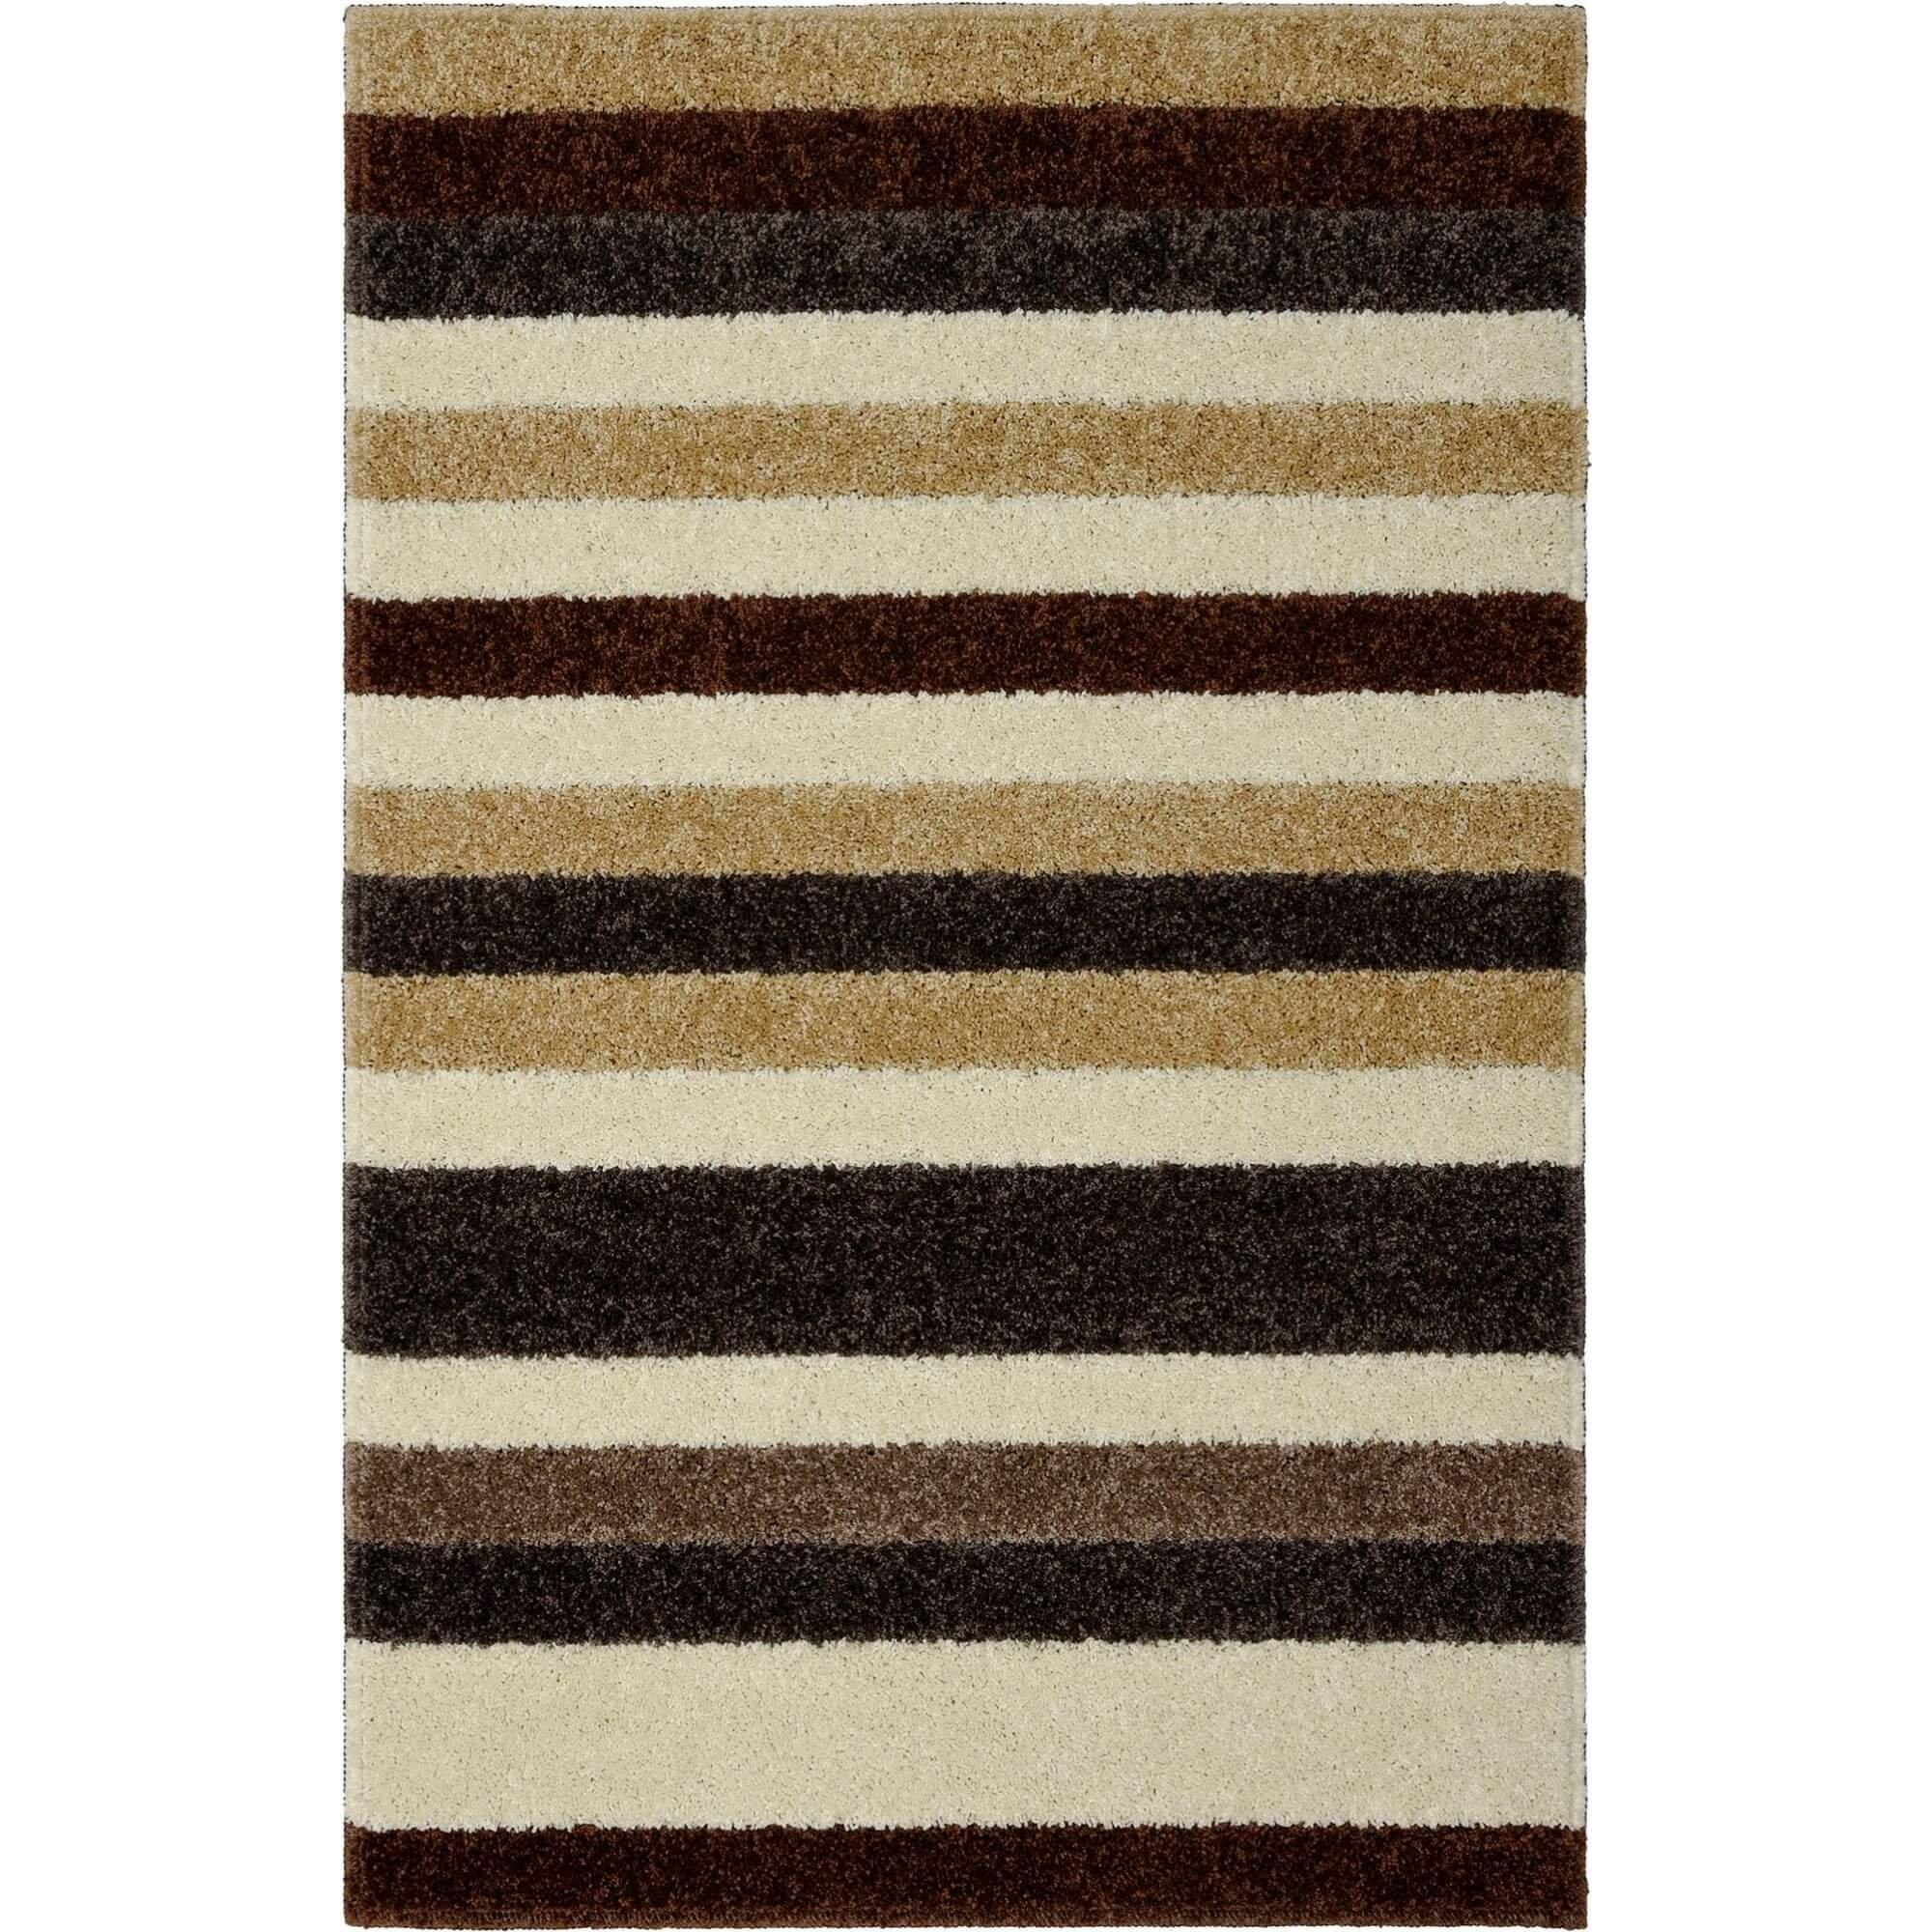 Alya Collection Washable Rugs & Runners Striped Design in Beige  - 117B